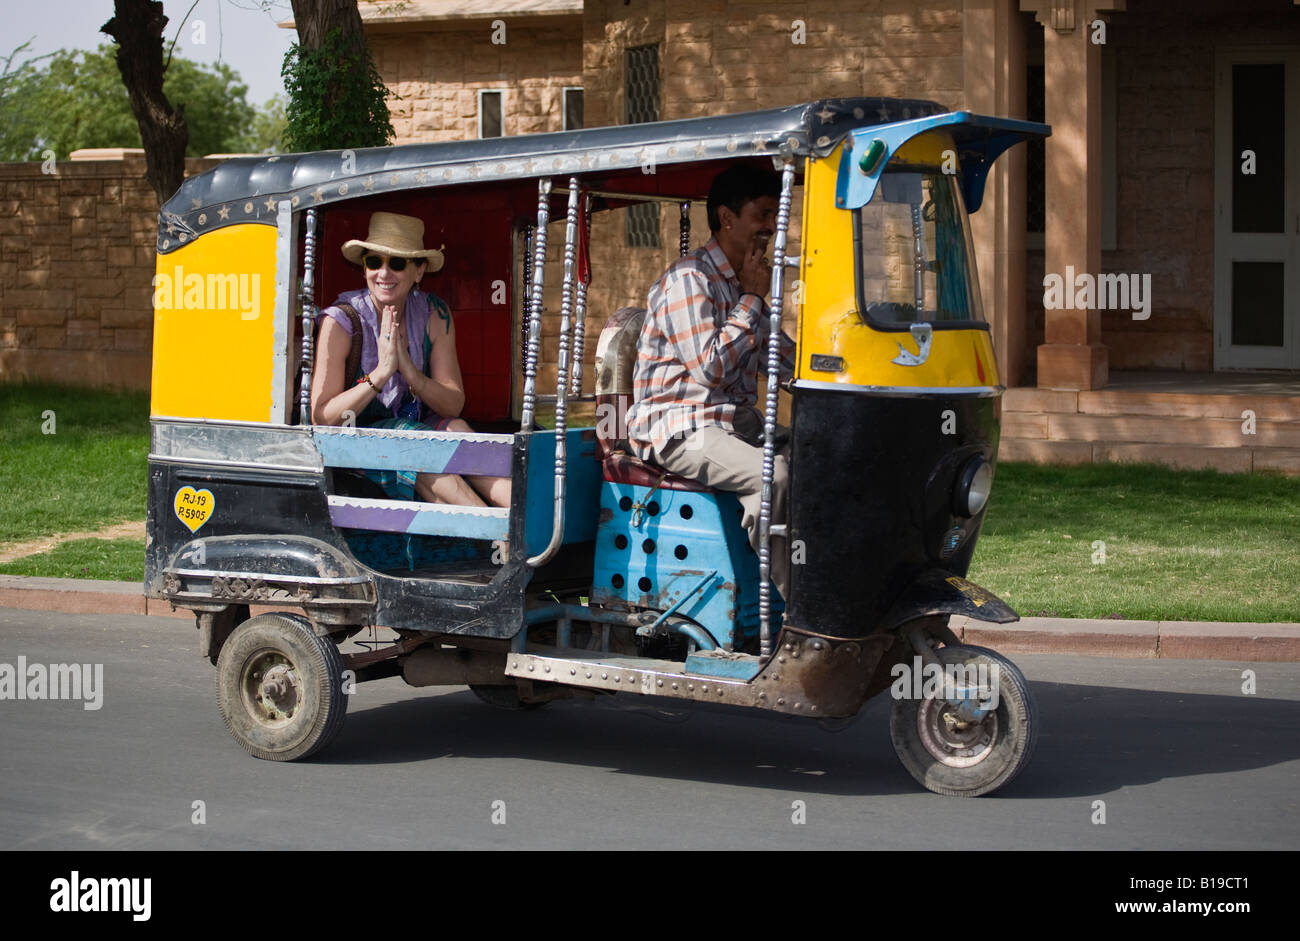 Christine Kolisch gets a ride in a tuk tuk or three wheeled motorcylce taxi in JODHPUR RAJASTHAN INDIA MR Stock Photo